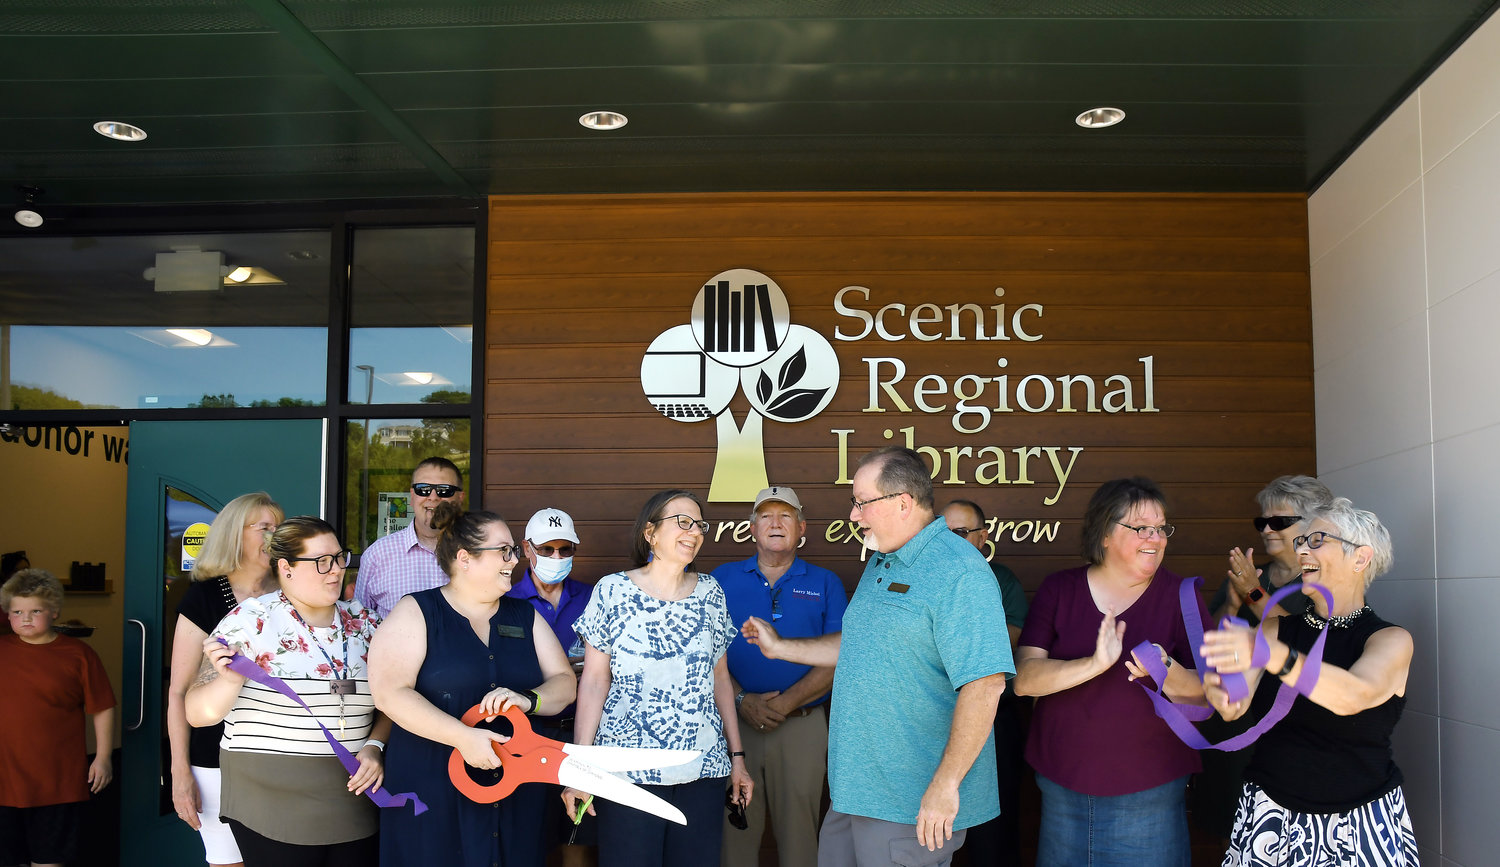 Hermann Area Chamber of Commerce President Gary Watts congratulates Scenic Regional Library trustee Kathi Ham (center, of Hermann) after the ceremonial ribbon cutting Saturday during grand-opening festivities of the Hermann branch. Also pictured (from left) are Karen Holtmeyer, (library trustee), Makayla Baker (branch employee), Steven Campbell (Scenic Regional’s executive director), Kasey Wright (manager of the Hermann and New Haven library facilities), John Barry (trustee), Larry Miskel (Gasconade County presiding commissioner), Dan McKinney (executive director of Hermann Area District Hospital), Carla Robertson (trustee), Linda Andrea (in corner, trustee), and Sheri Hausman (former Hermann branch manager, now volunteer manager of the library’s art gallery). Hausman has worked for the library system for 33 years.